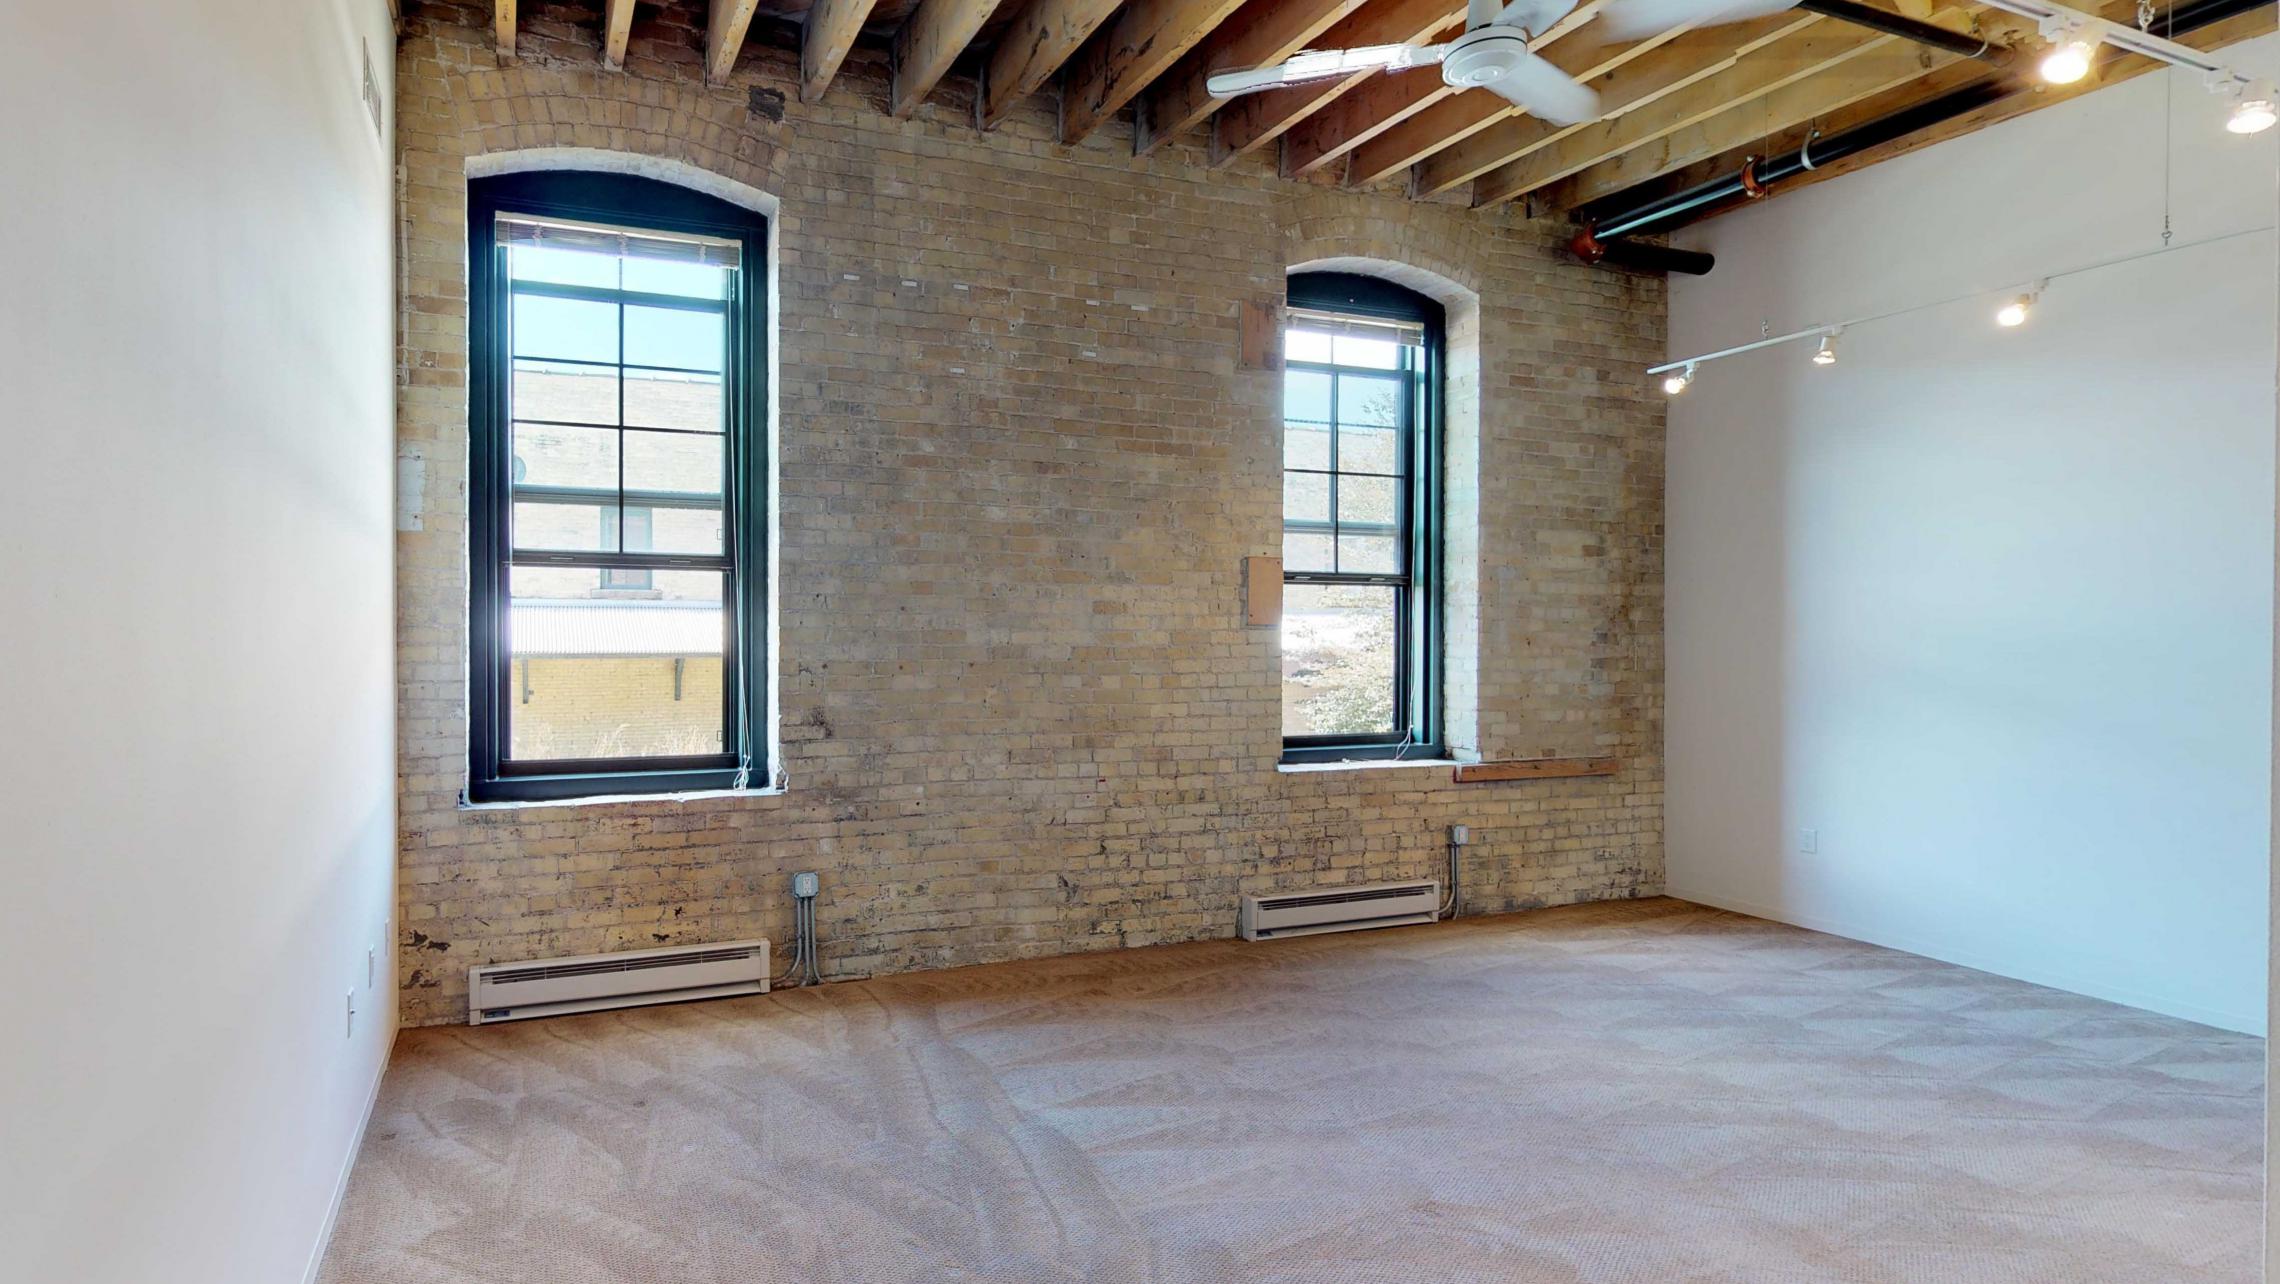 Tobacco-Lofts-Apartment-E210-one-bedroom-historic-exposed-brick-downtown-madison.jpg